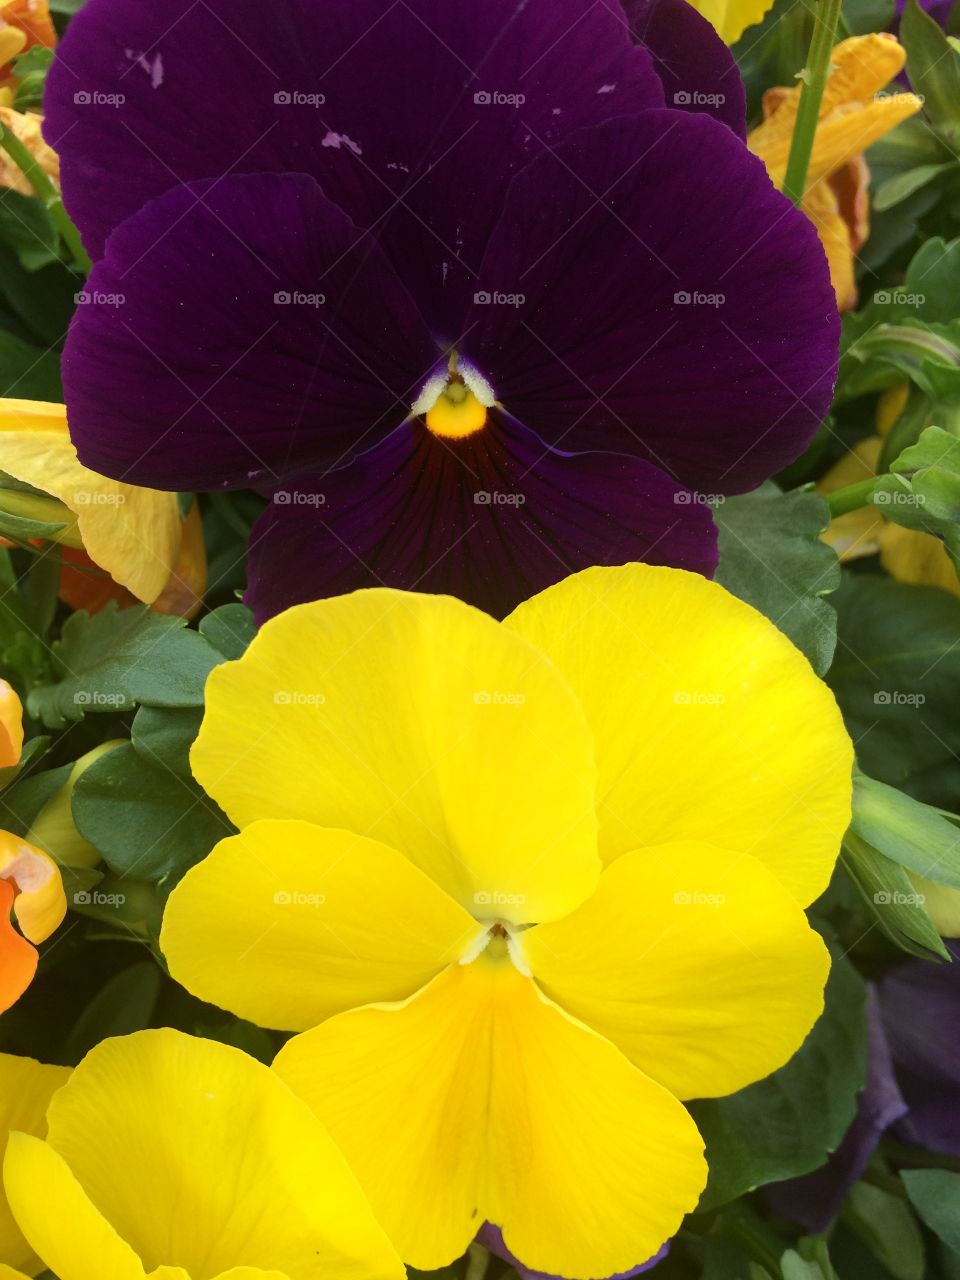 Yellow and purple pansies blooming in Oklahoma spring garden. 